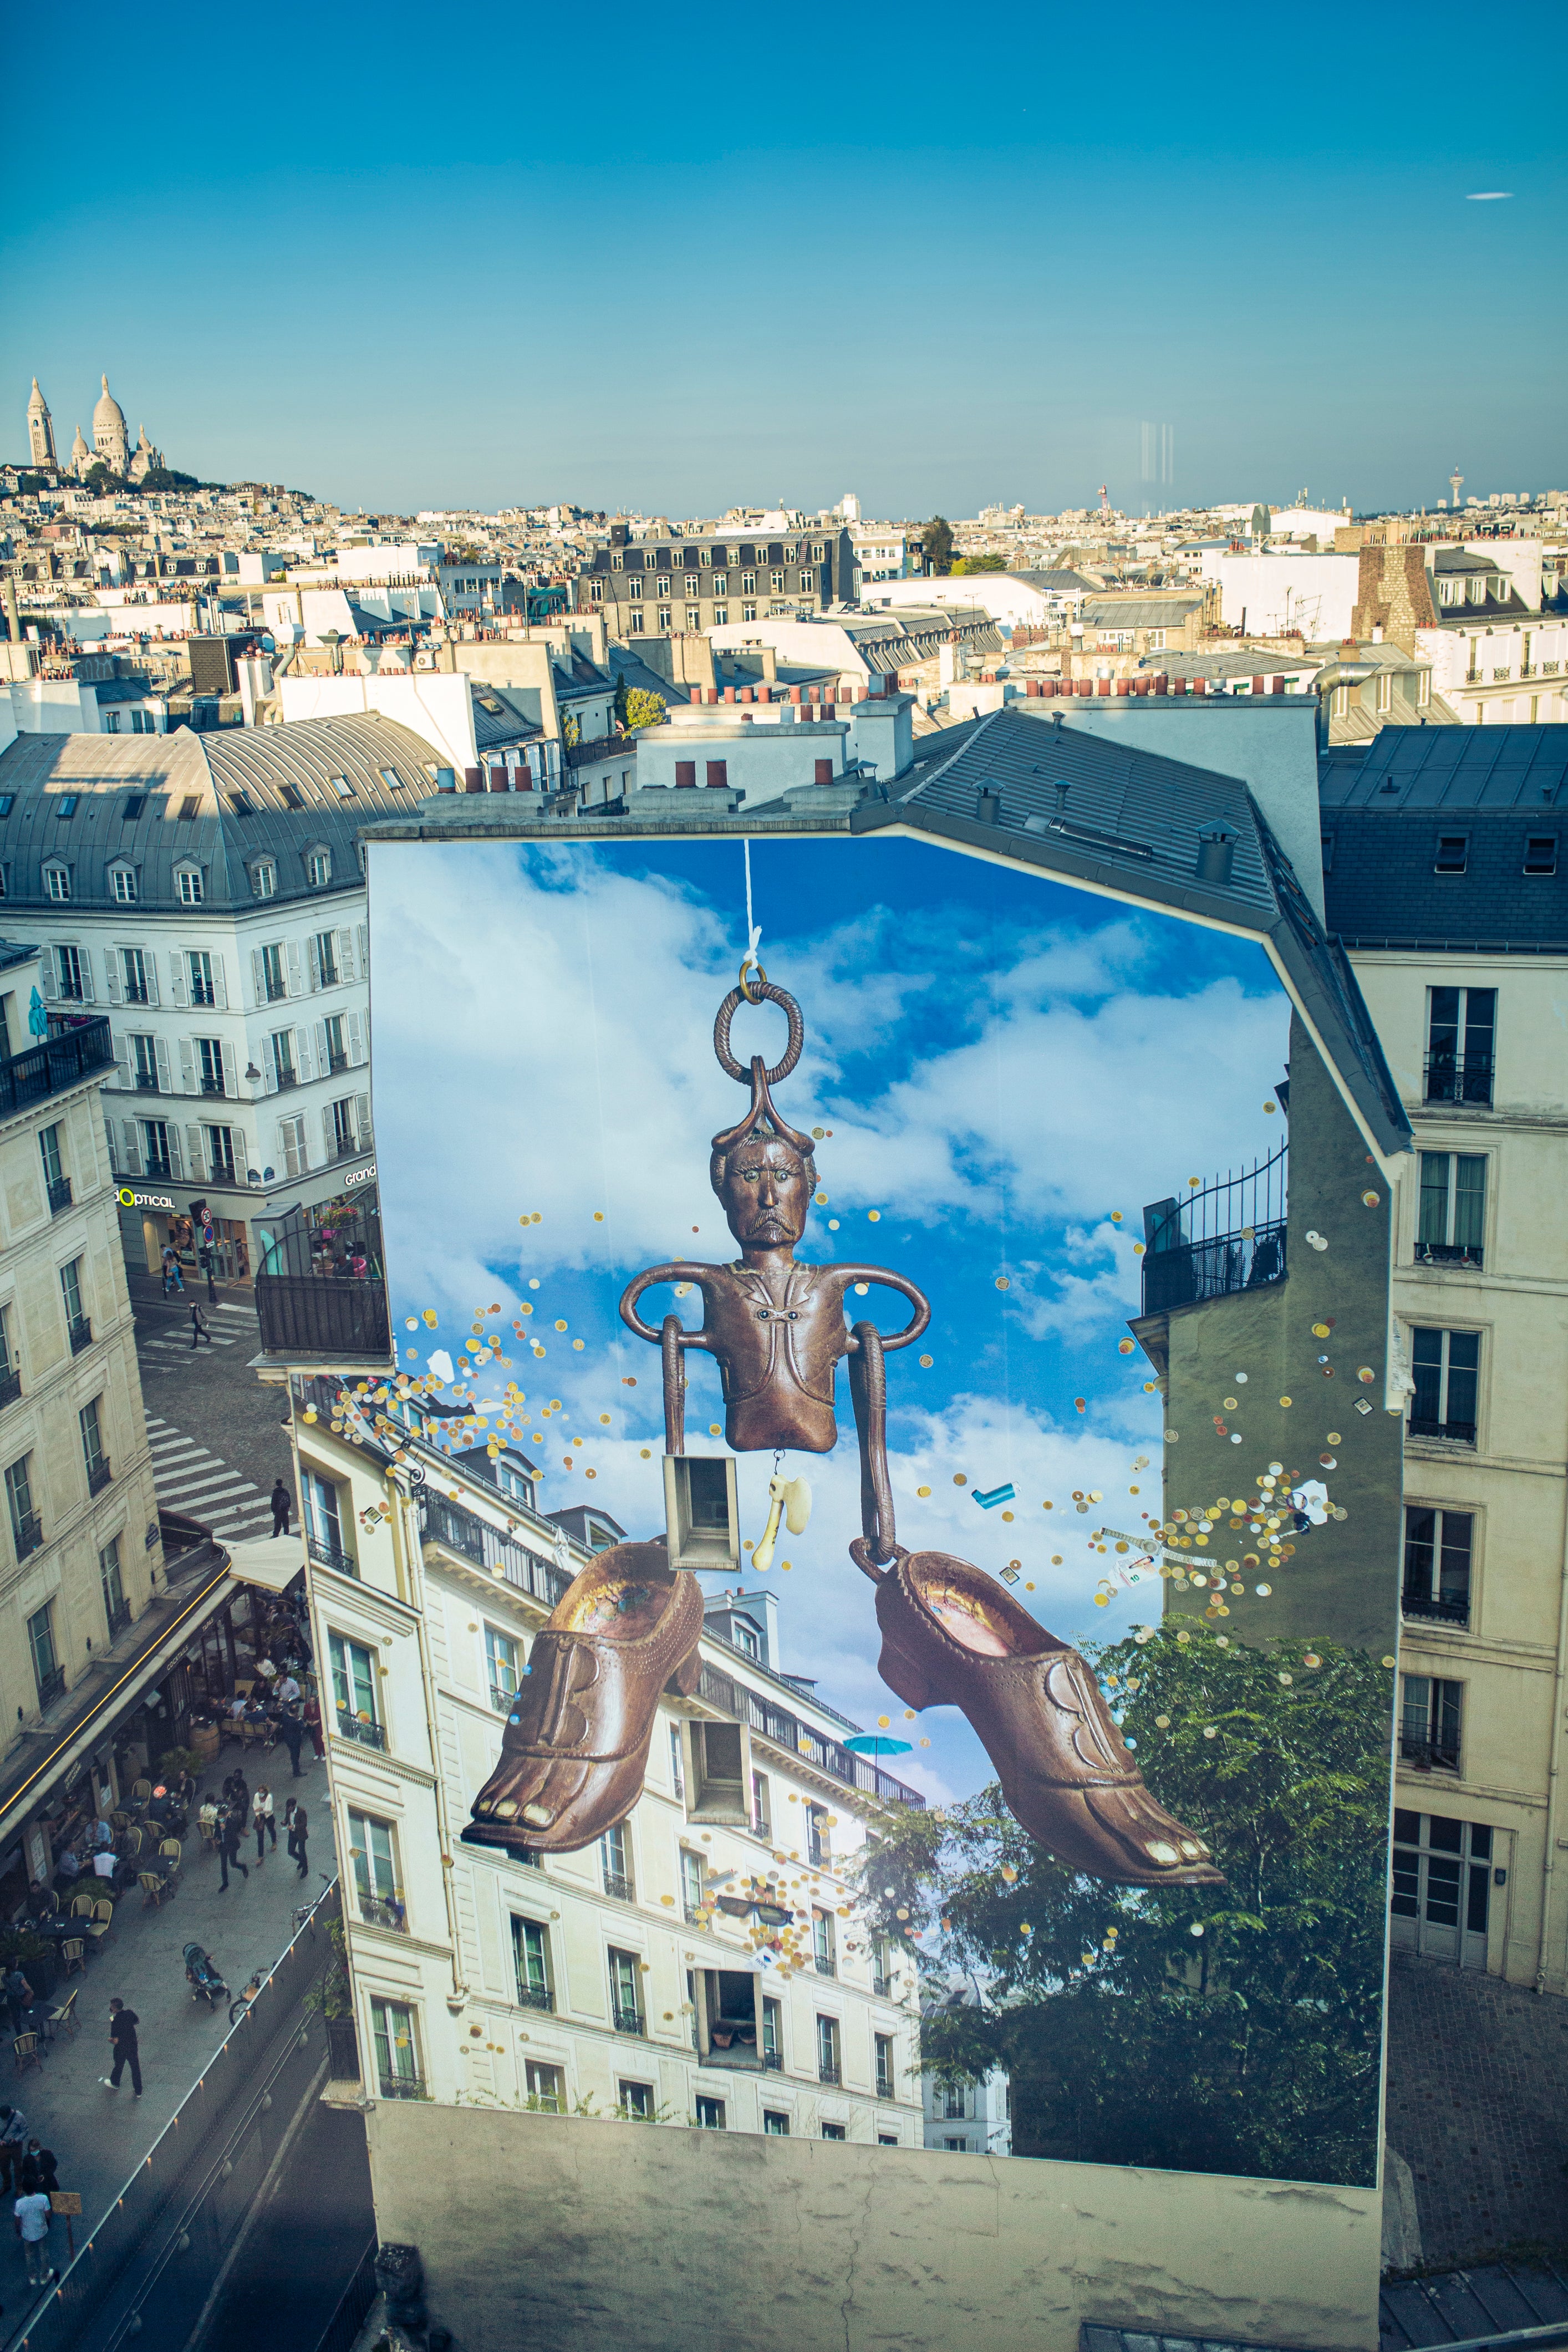 Mural on side of building with Paris skyline in background